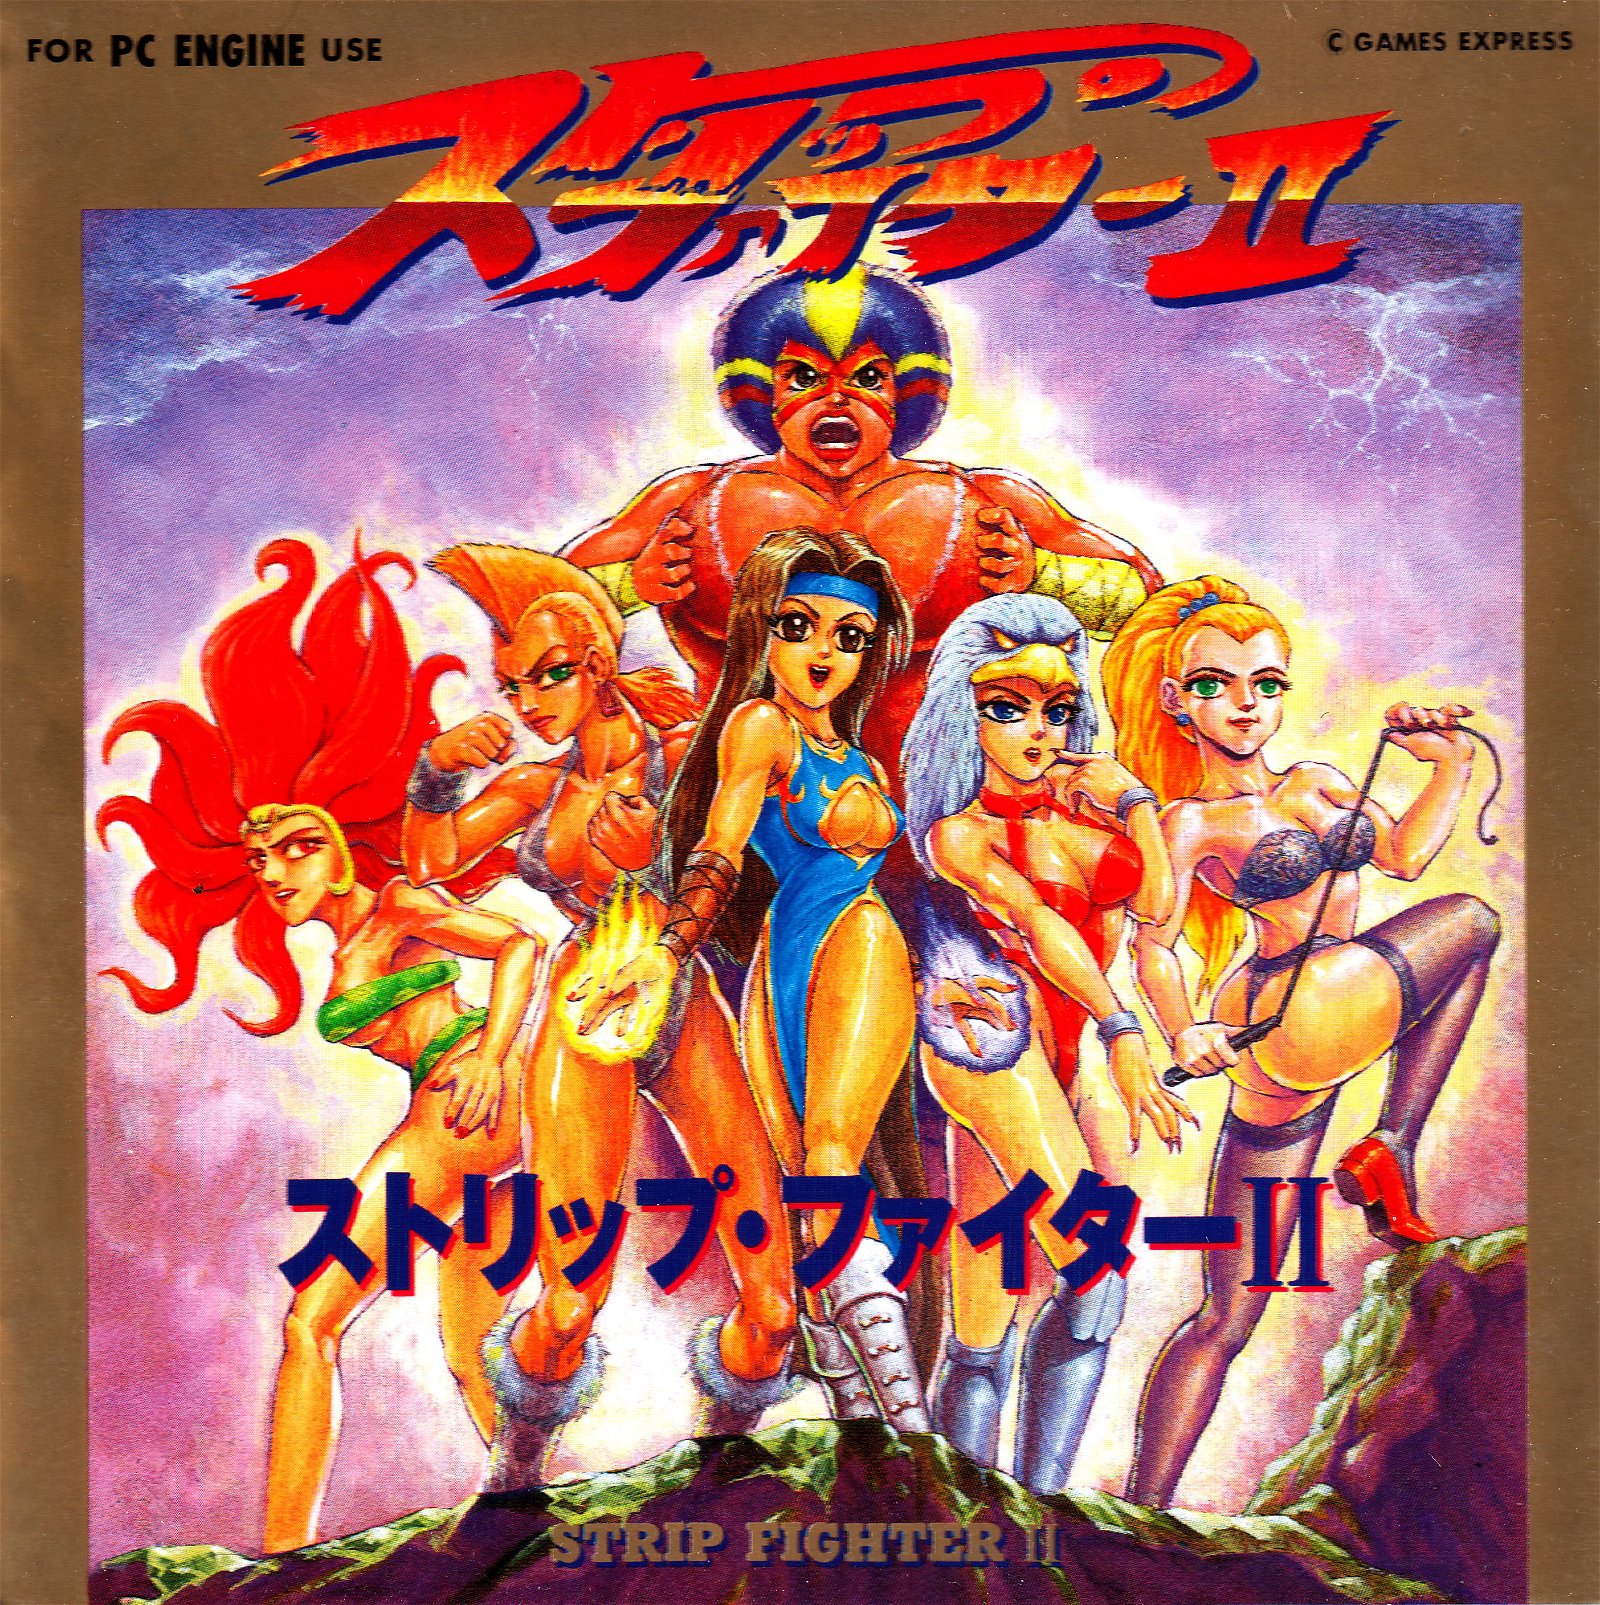 Image of Strip Fighter II